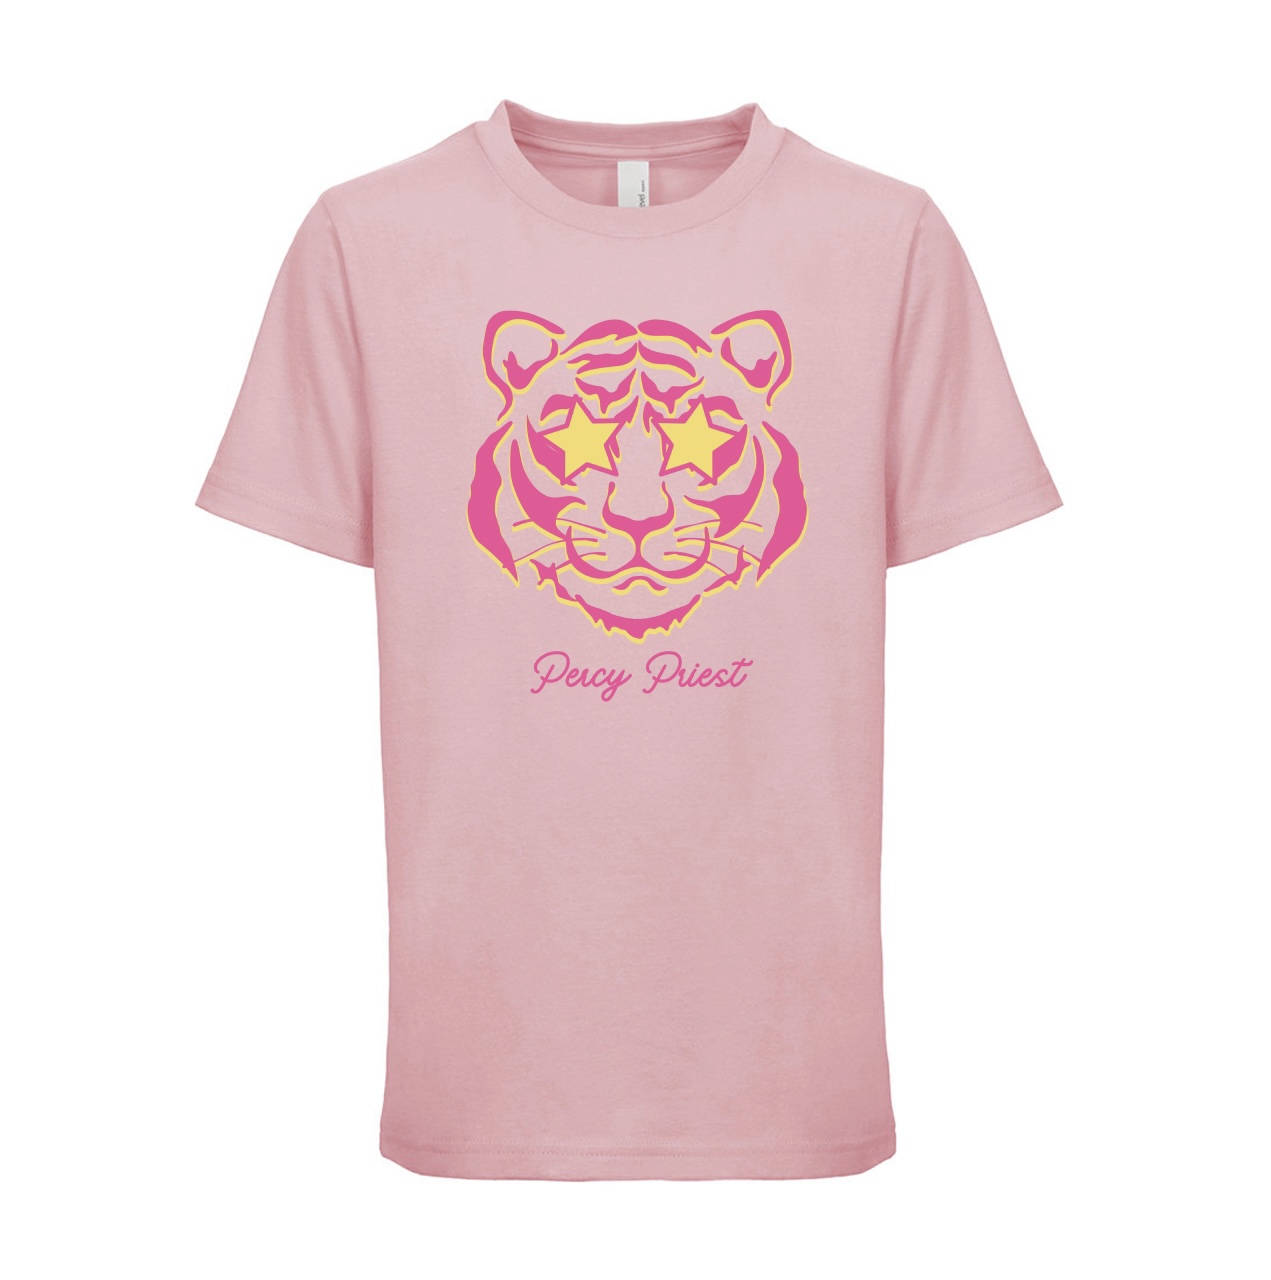 Youth Pink T-Shirt - Percy Priest Elementary